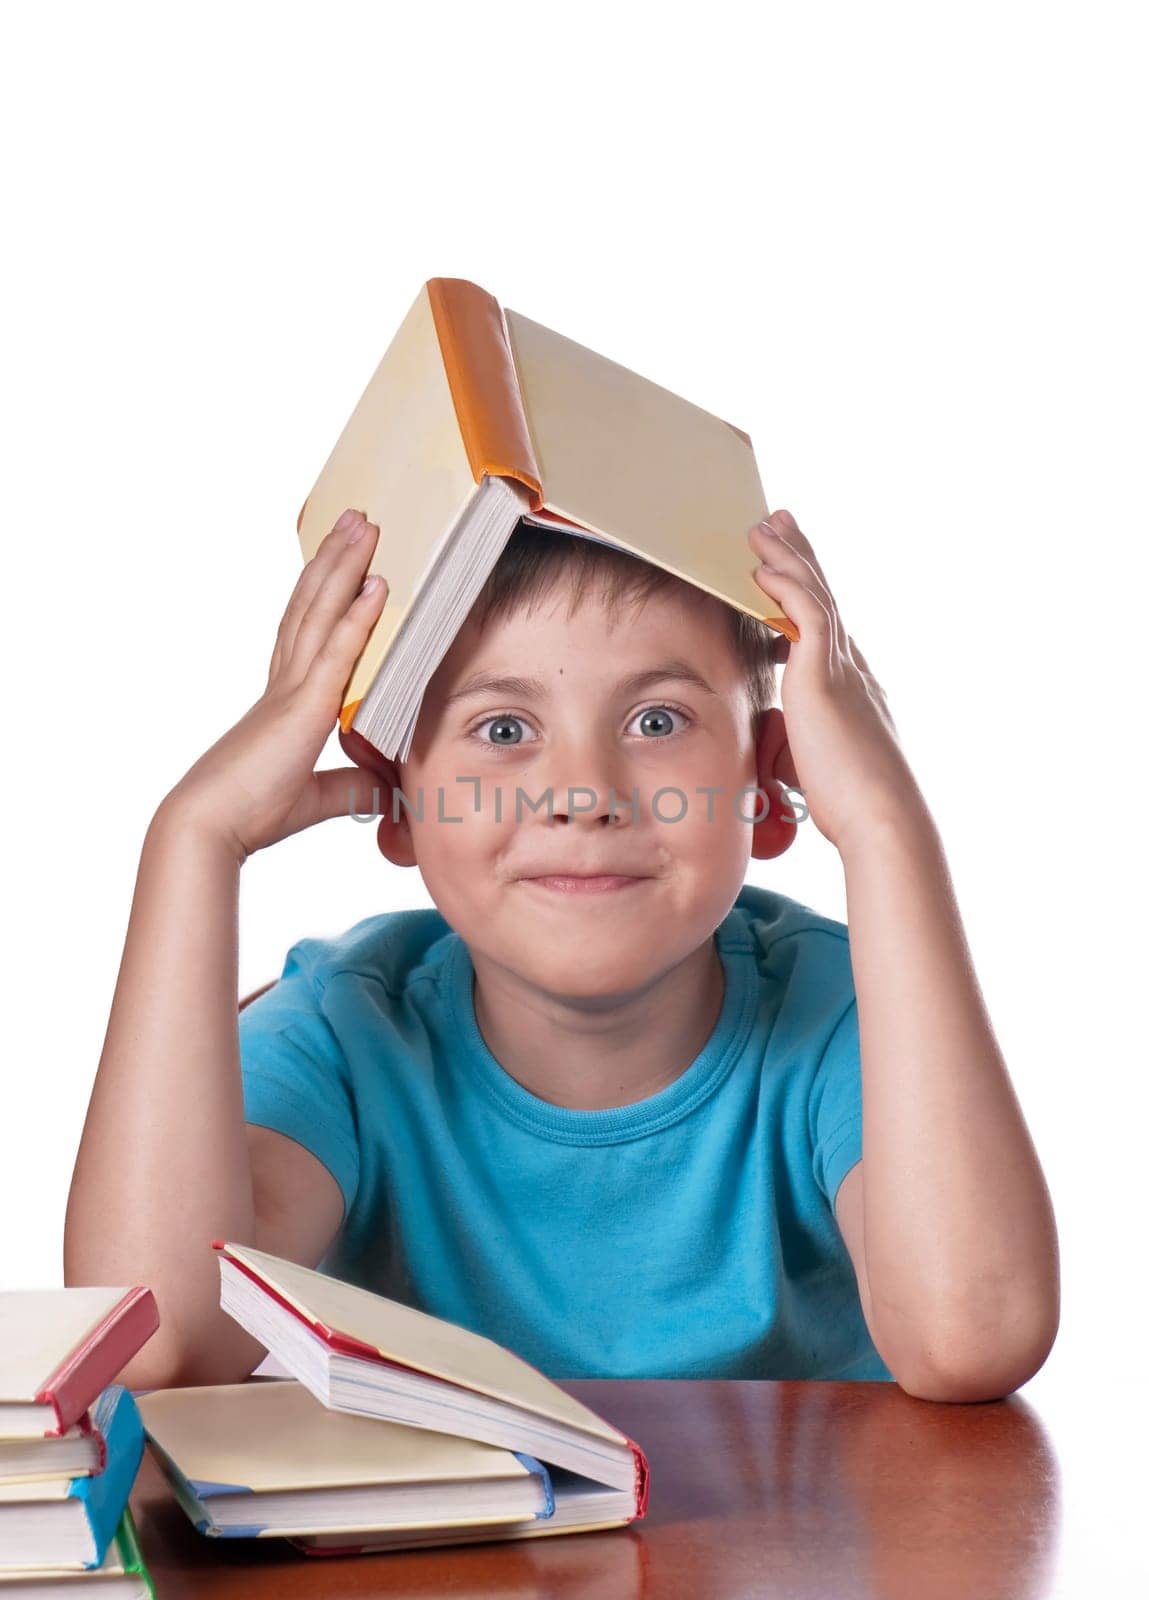 Child and books. The boy reads and plays with books. Delight on the face of the child from the books read. A preschooler is learning to read. Portrait of a boy on a white background by aprilphoto